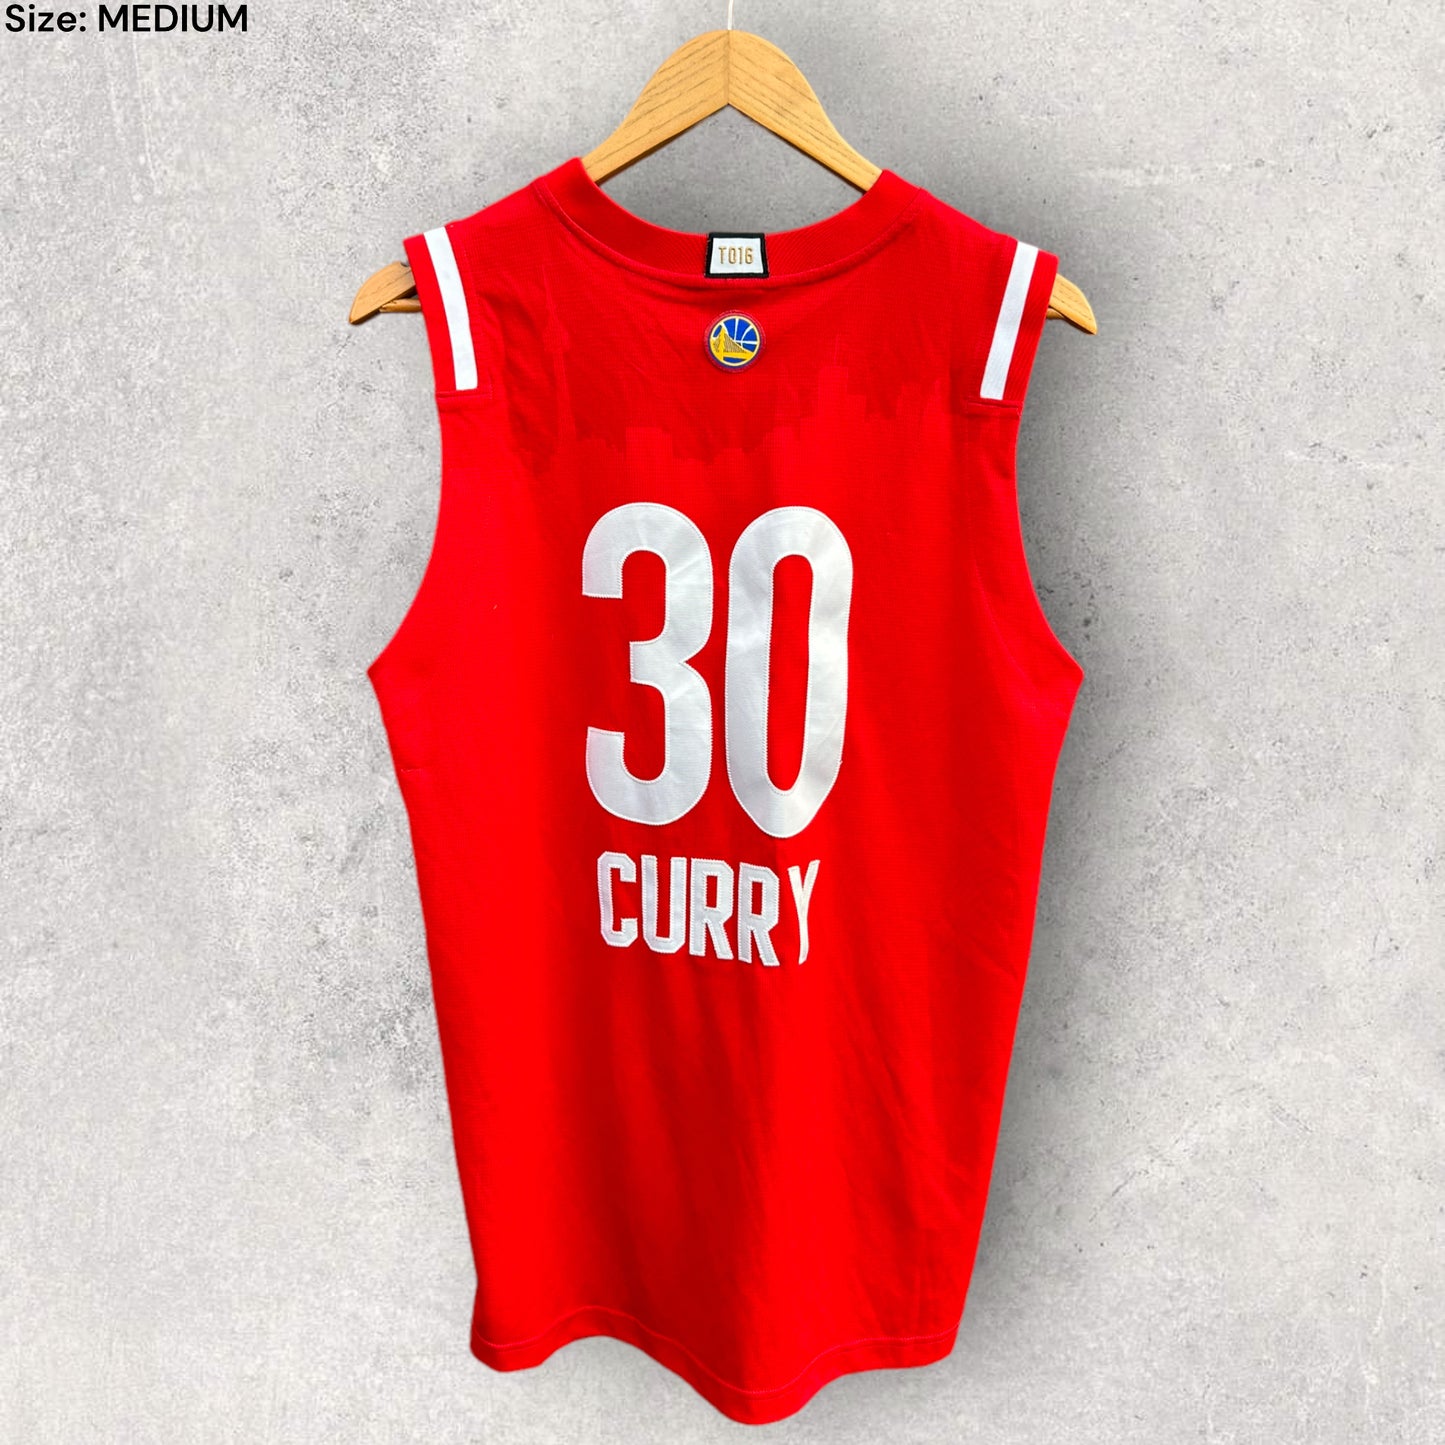 STEPH CURRY WEST ALL STAR 2016 ADIDAS JERSEY